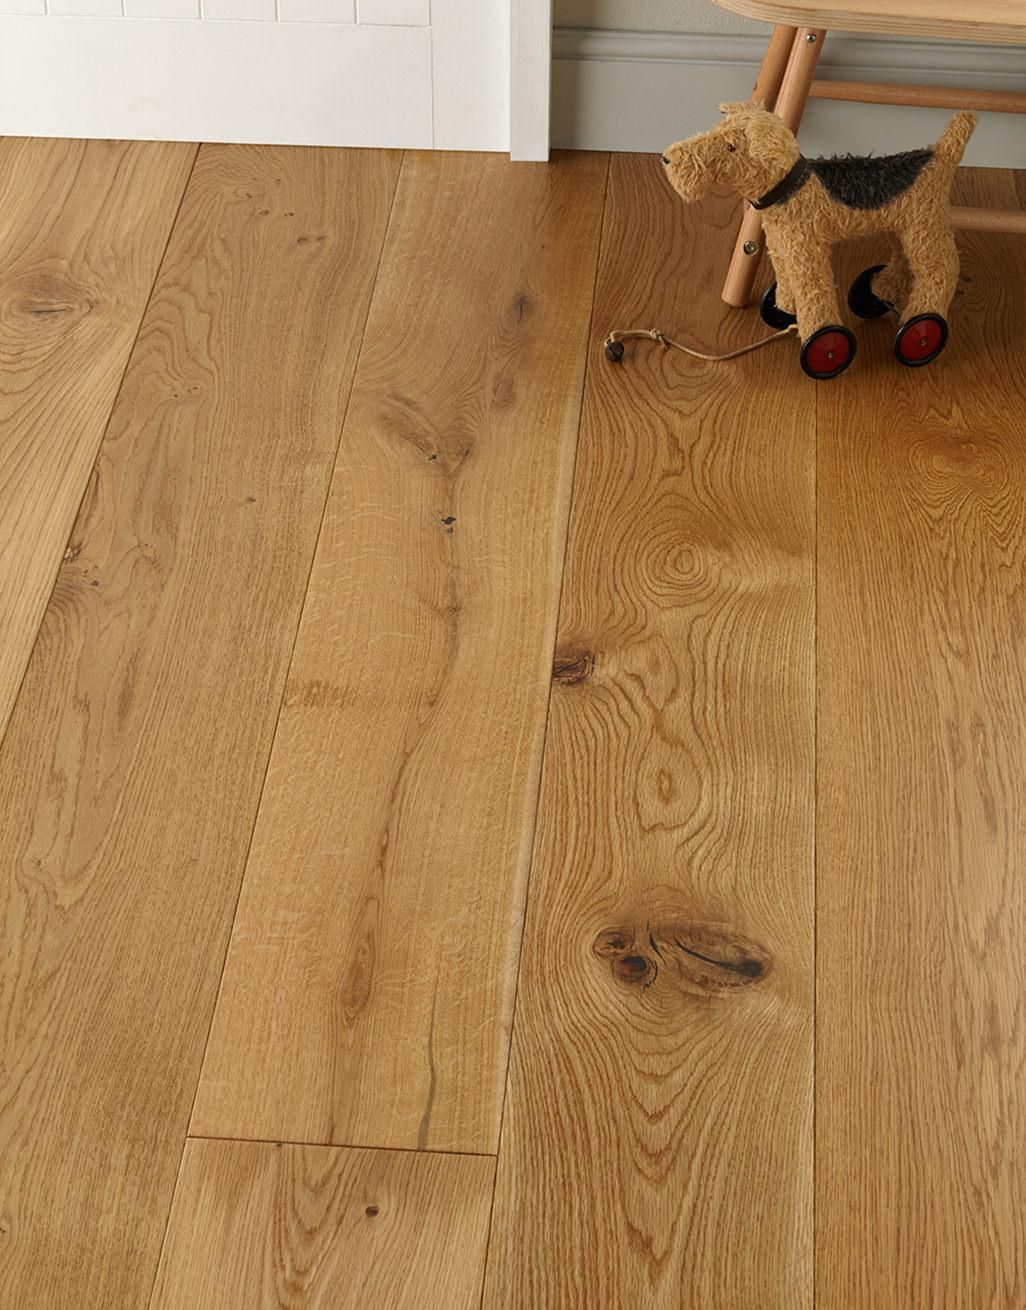 Grand Imperial Natural Oak Lacquered Engineered Wood Flooring 1